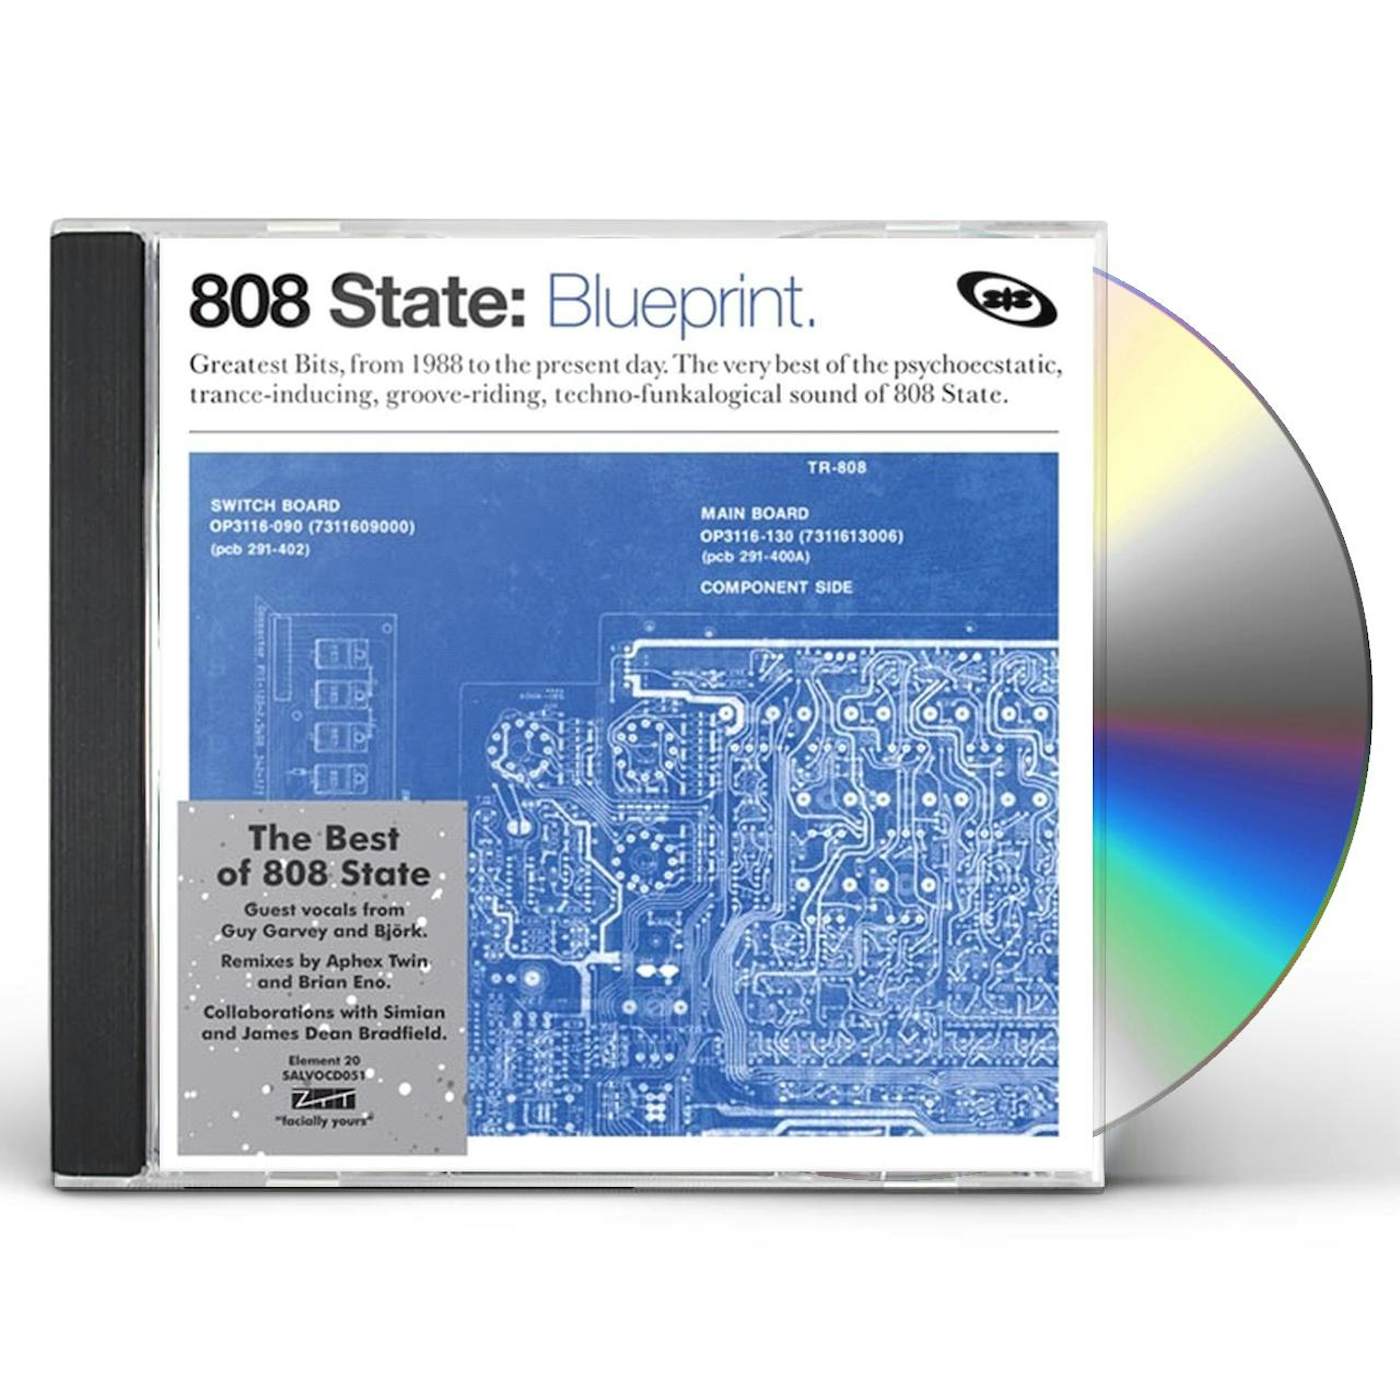 808 State BLUEPRINT: BEST OF CD